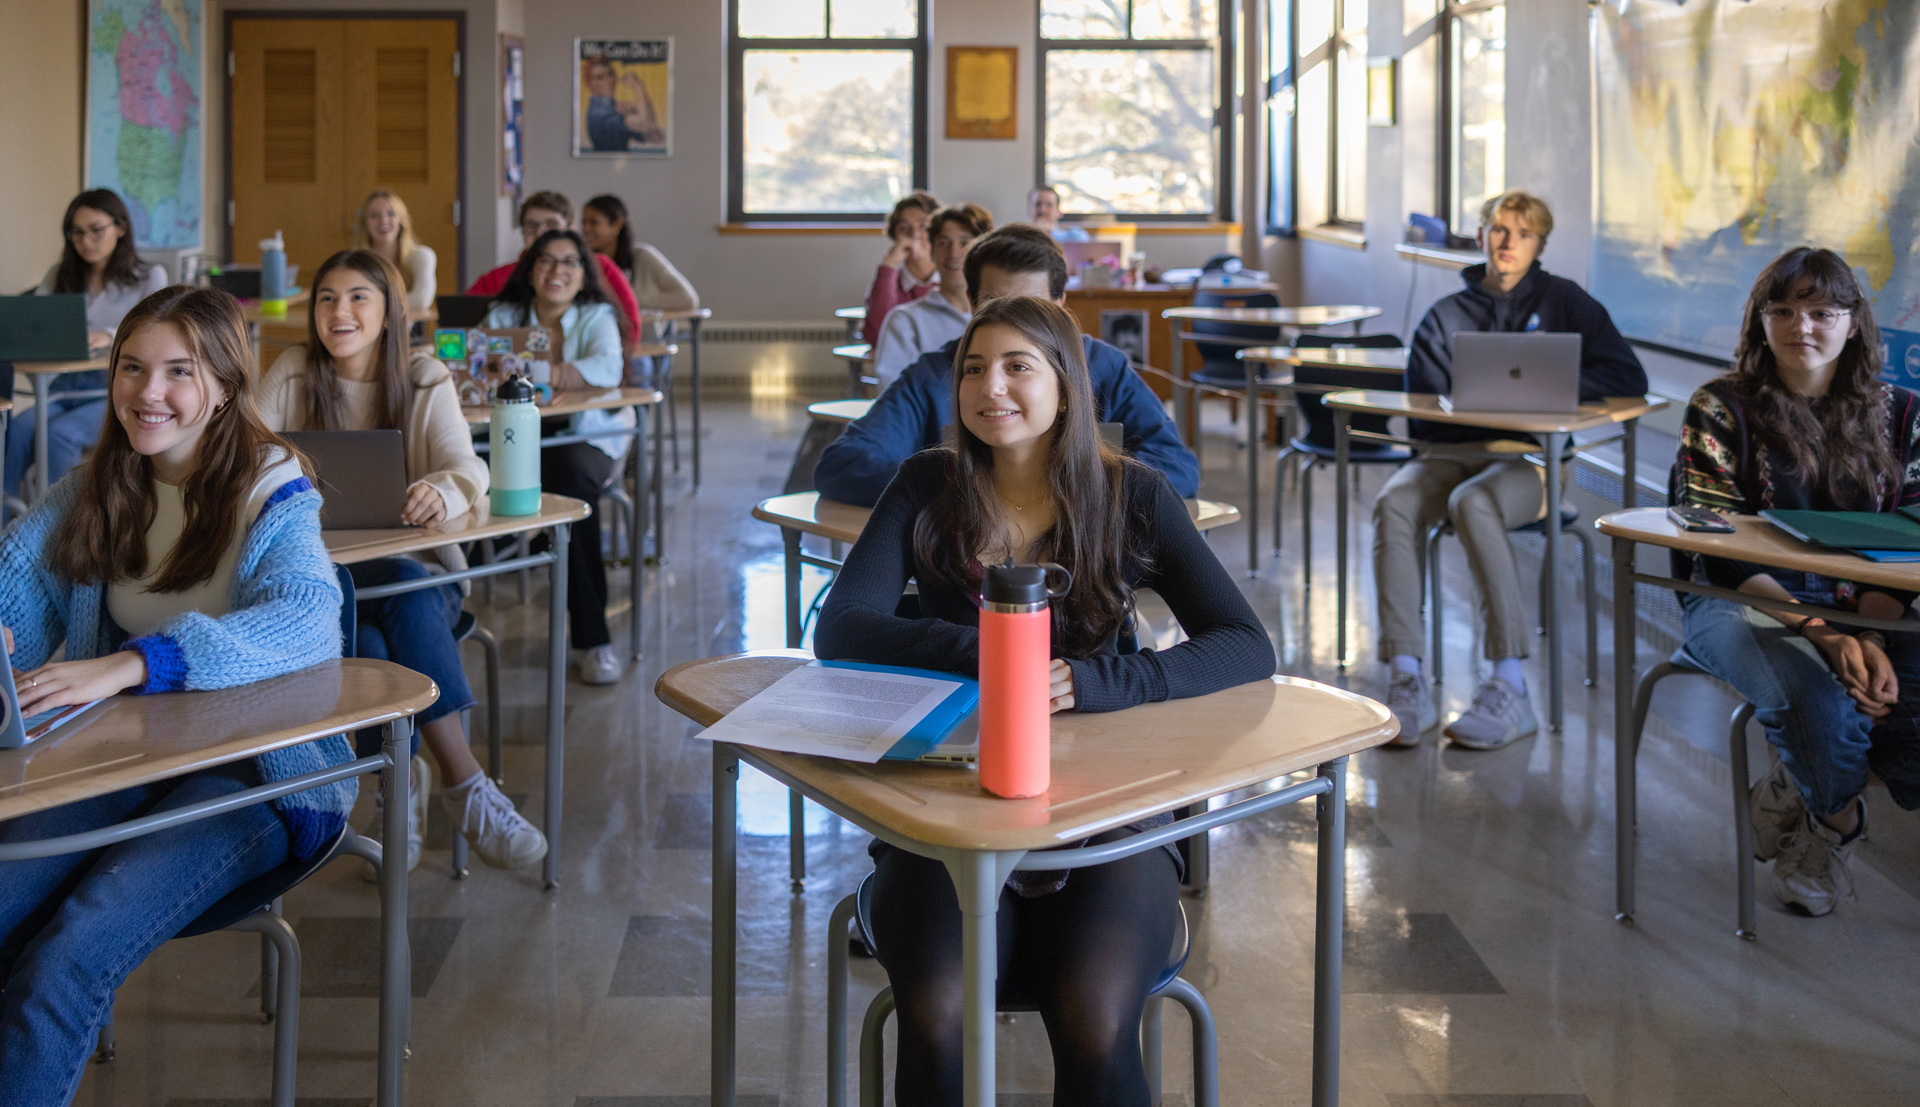 students smiling at their desks during class